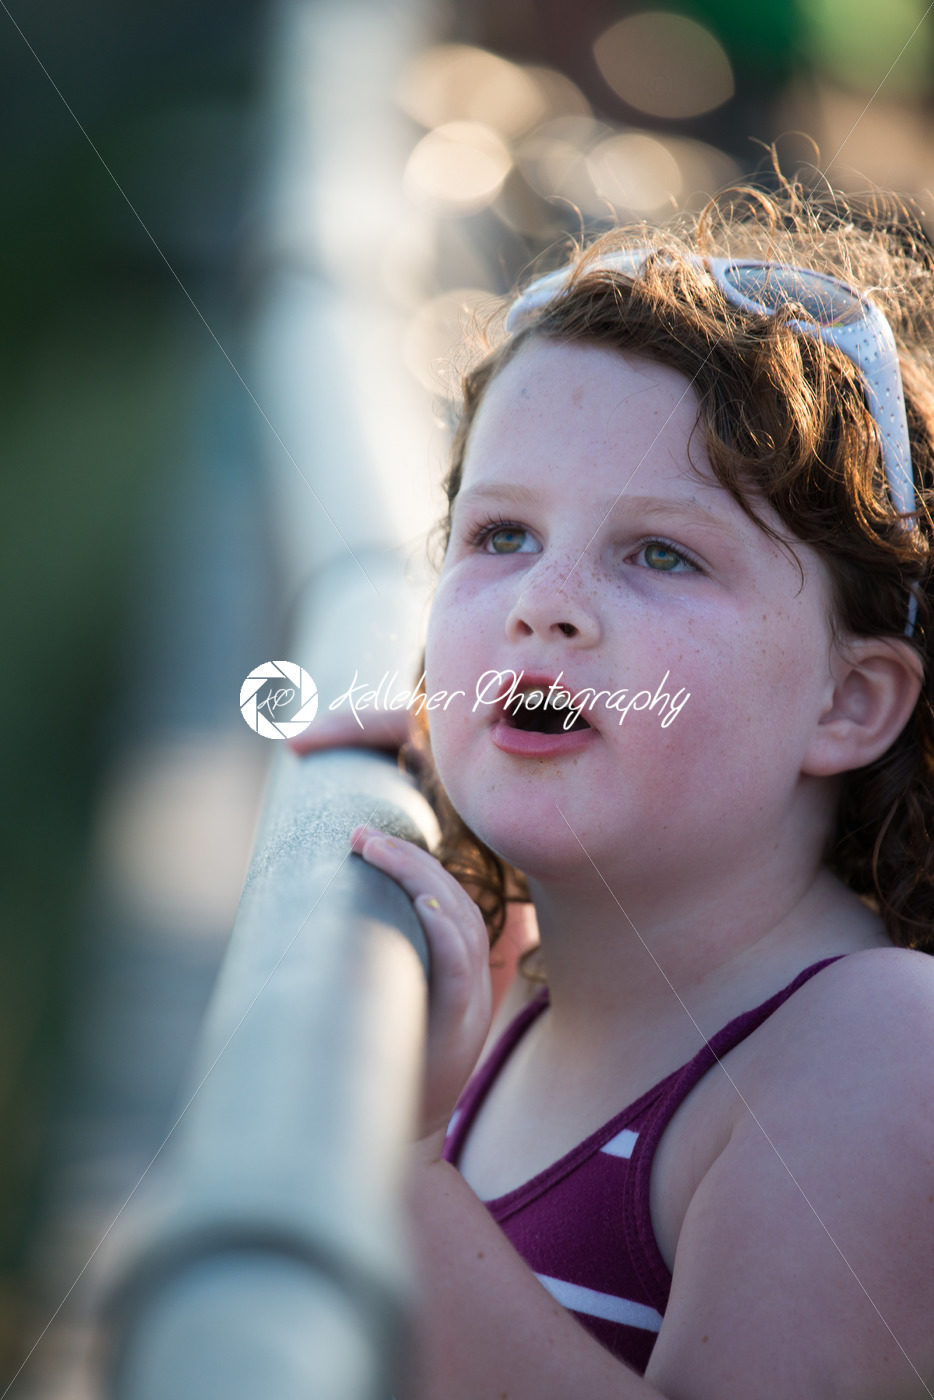 Young cute little girl on the boardwalk looking up - Kelleher Photography Store